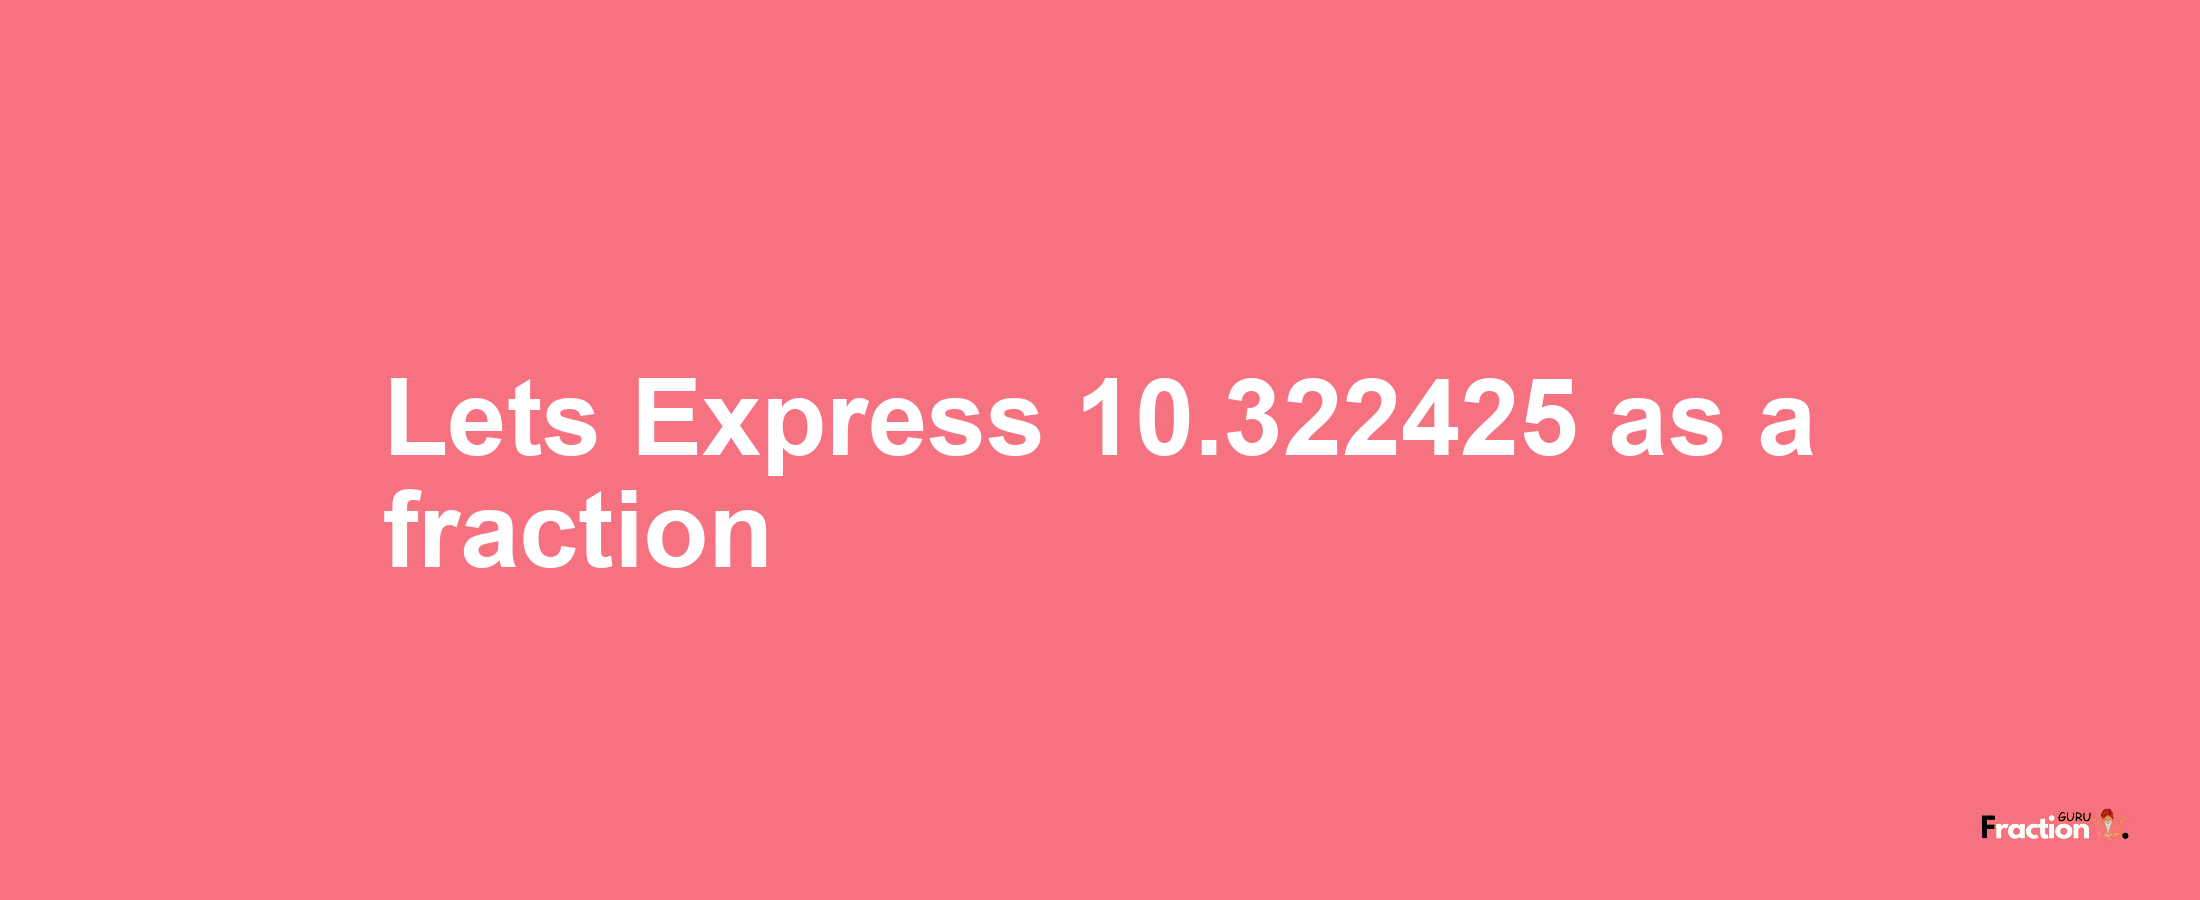 Lets Express 10.322425 as afraction